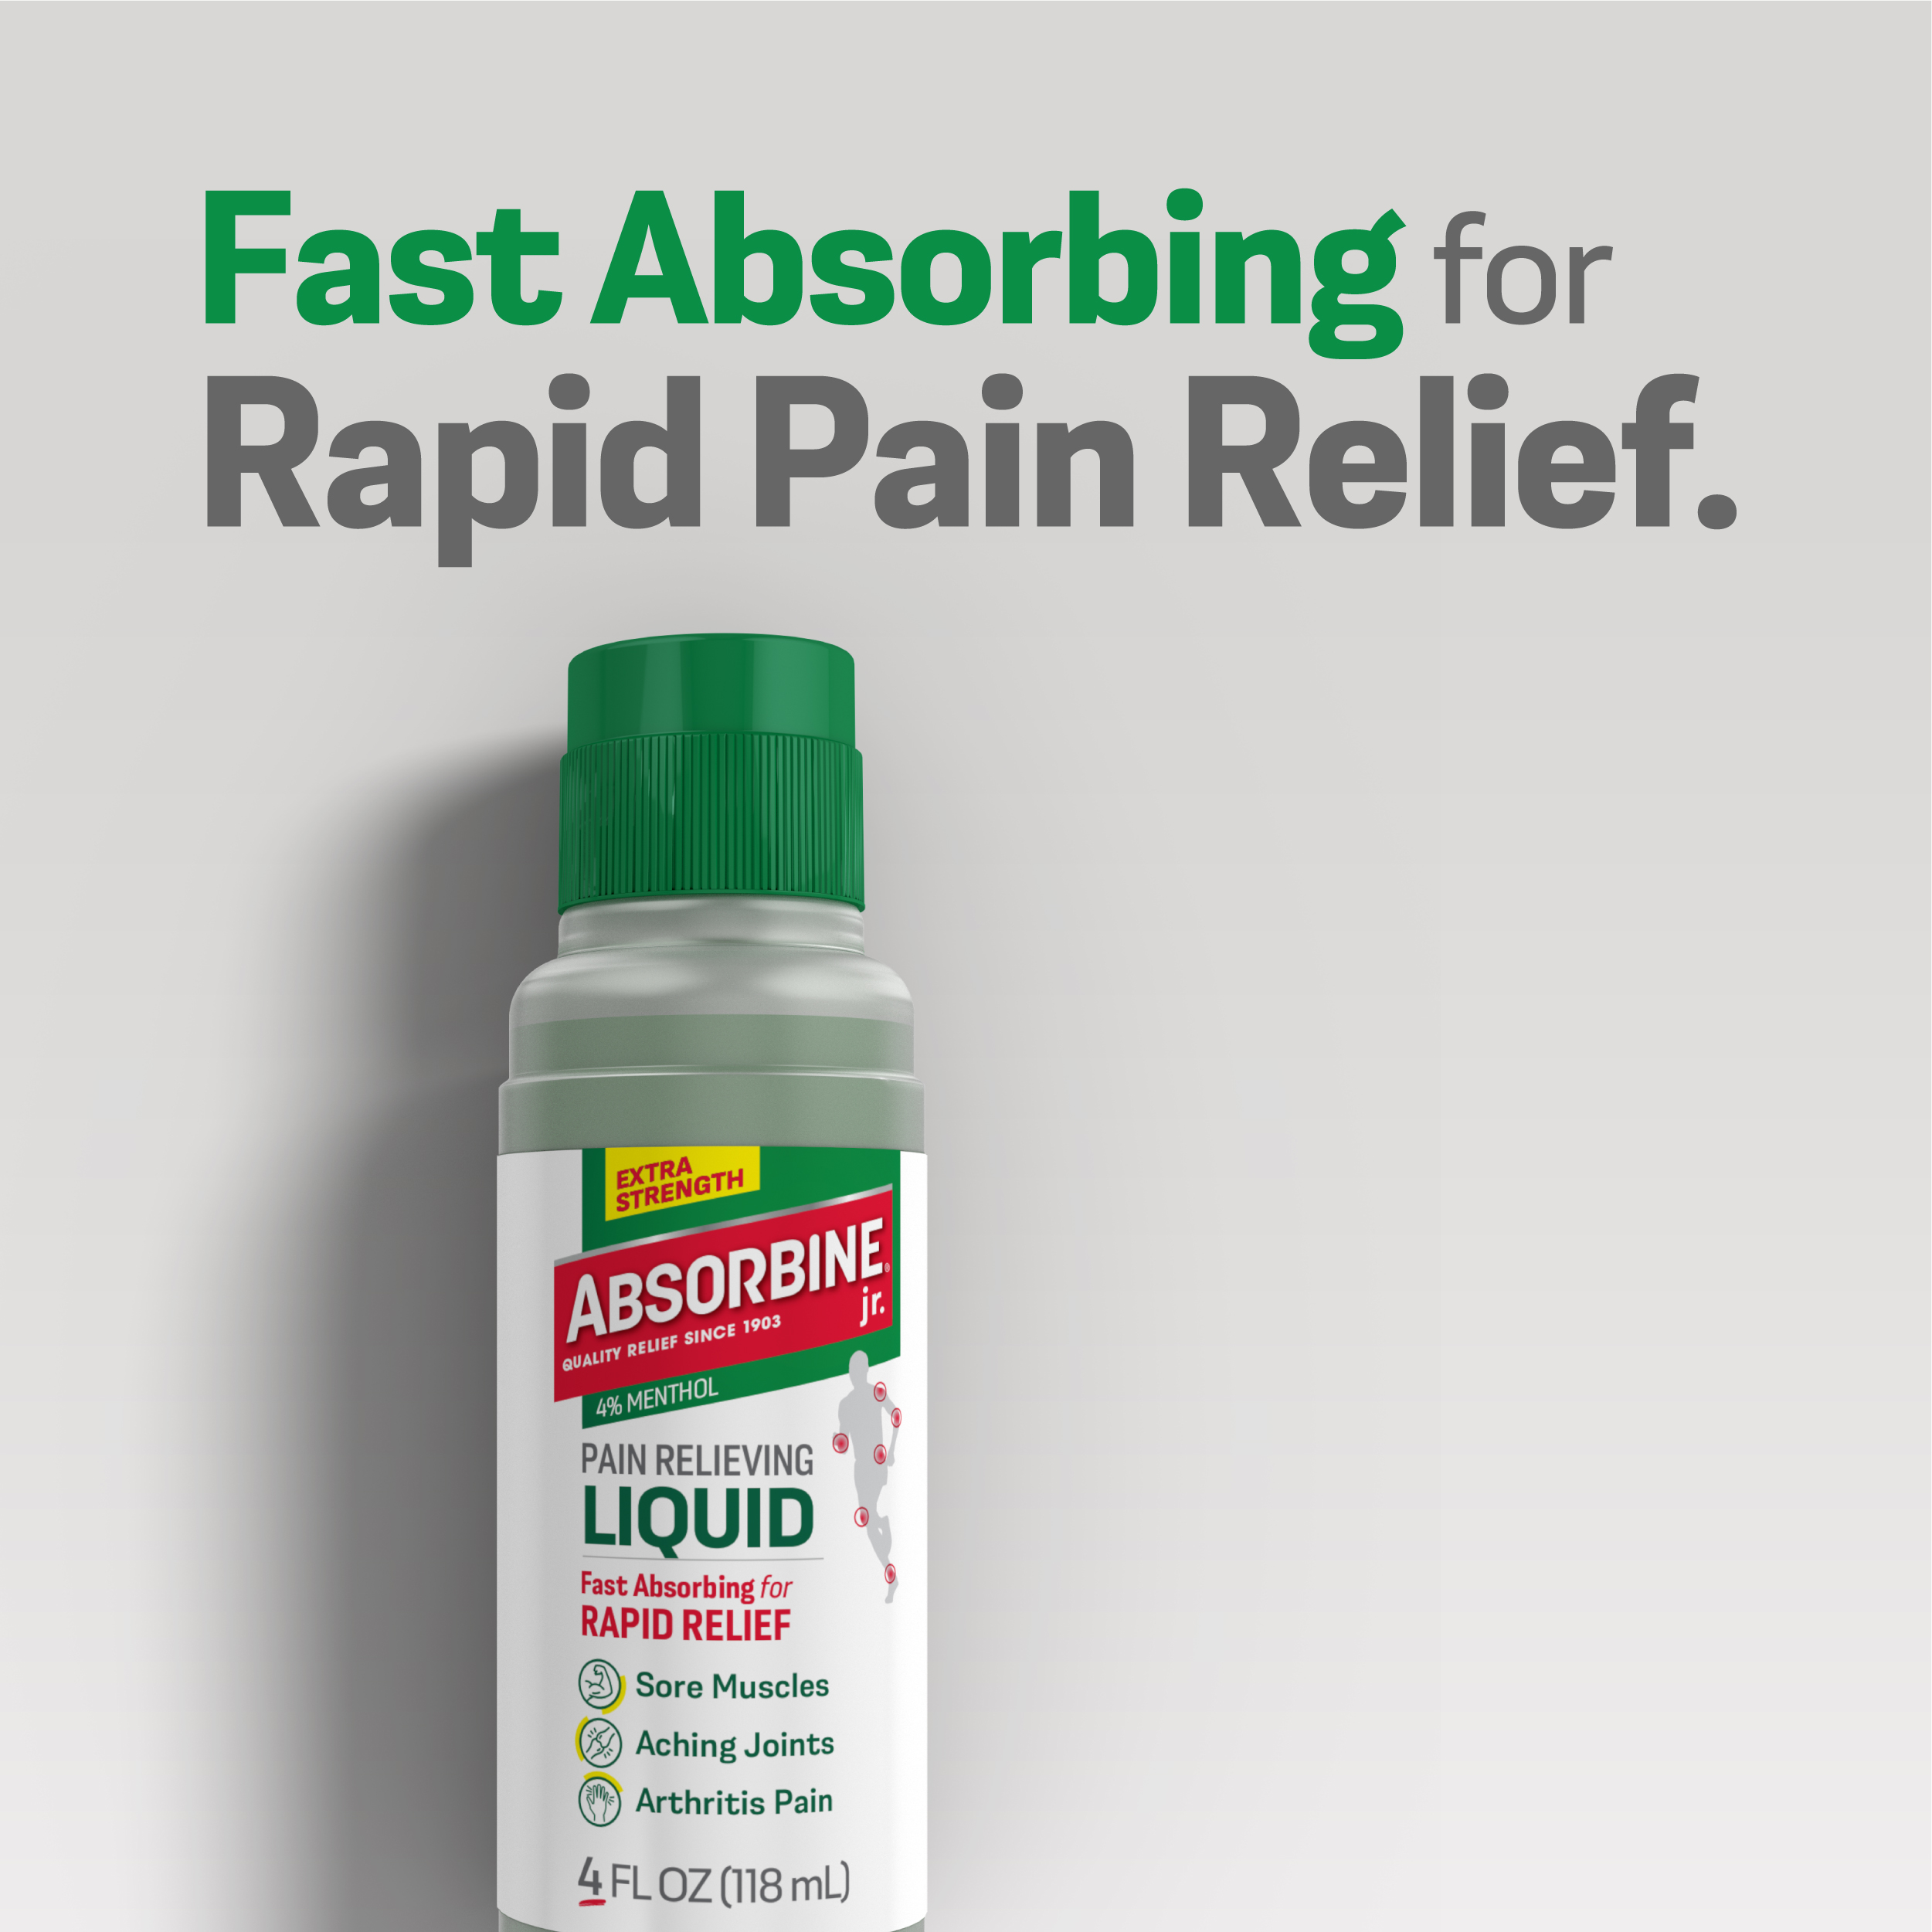 Absorbine Jr. Pain Relieving Liquid with Menthol for Sore Muscles, Joint Aches and Arthritis Pain Relief, 4oz - image 2 of 8